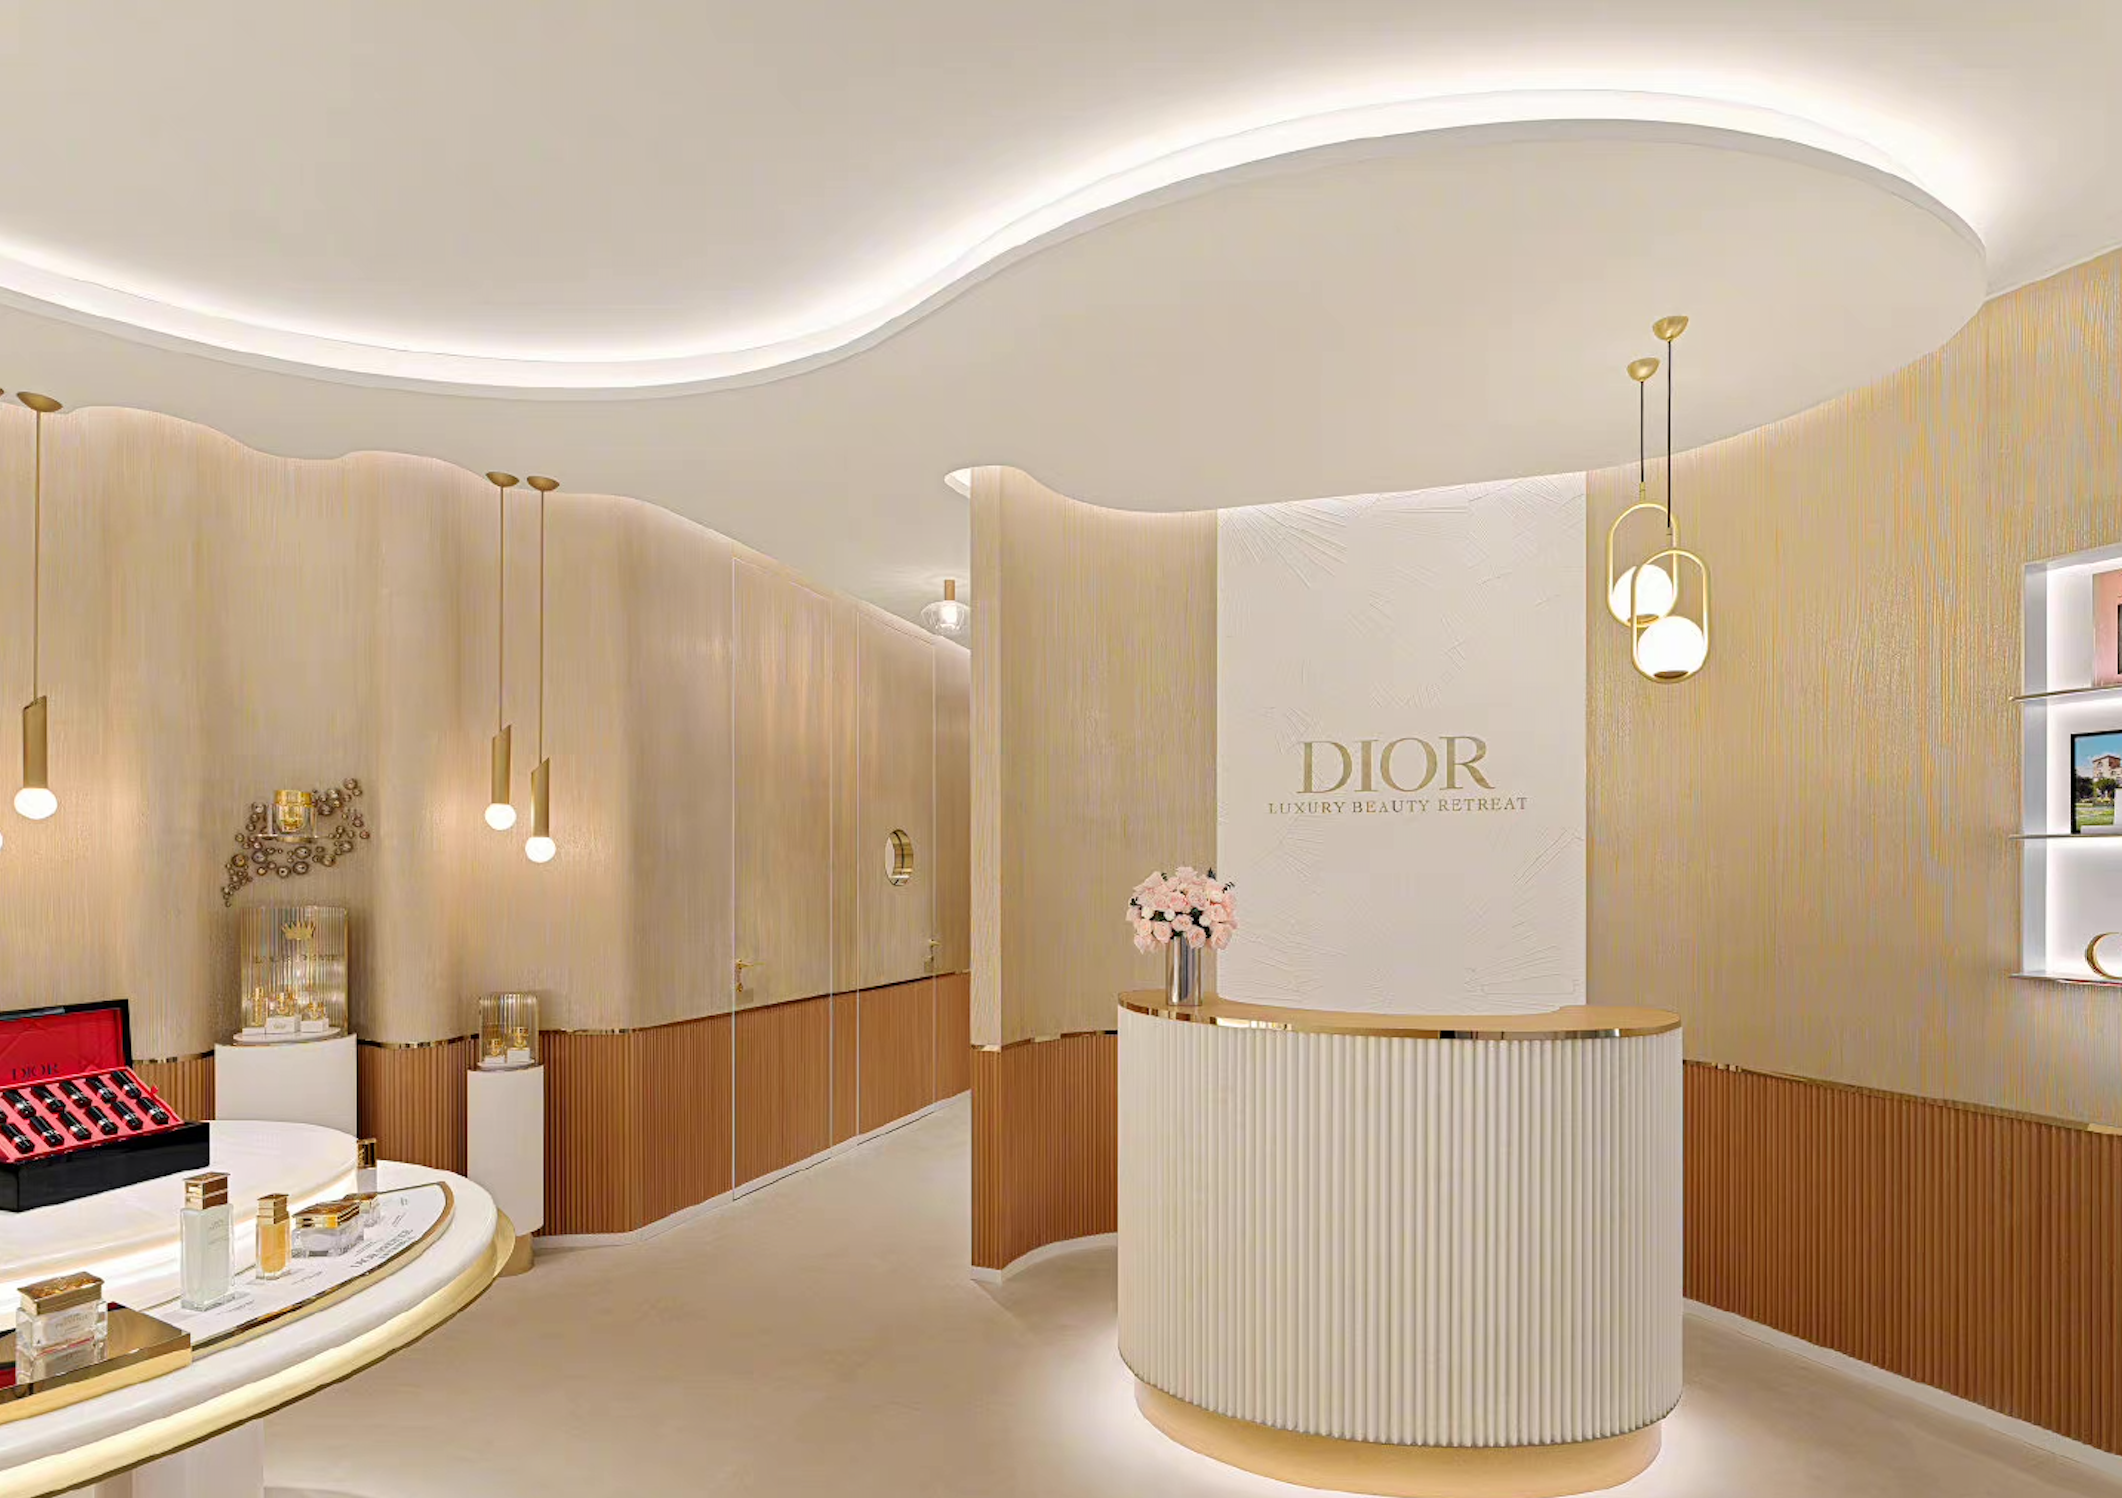 Dior is making a play on luxury spas in China, and it’s only a matter of time before others follow suit. Image Courtesy of Dior